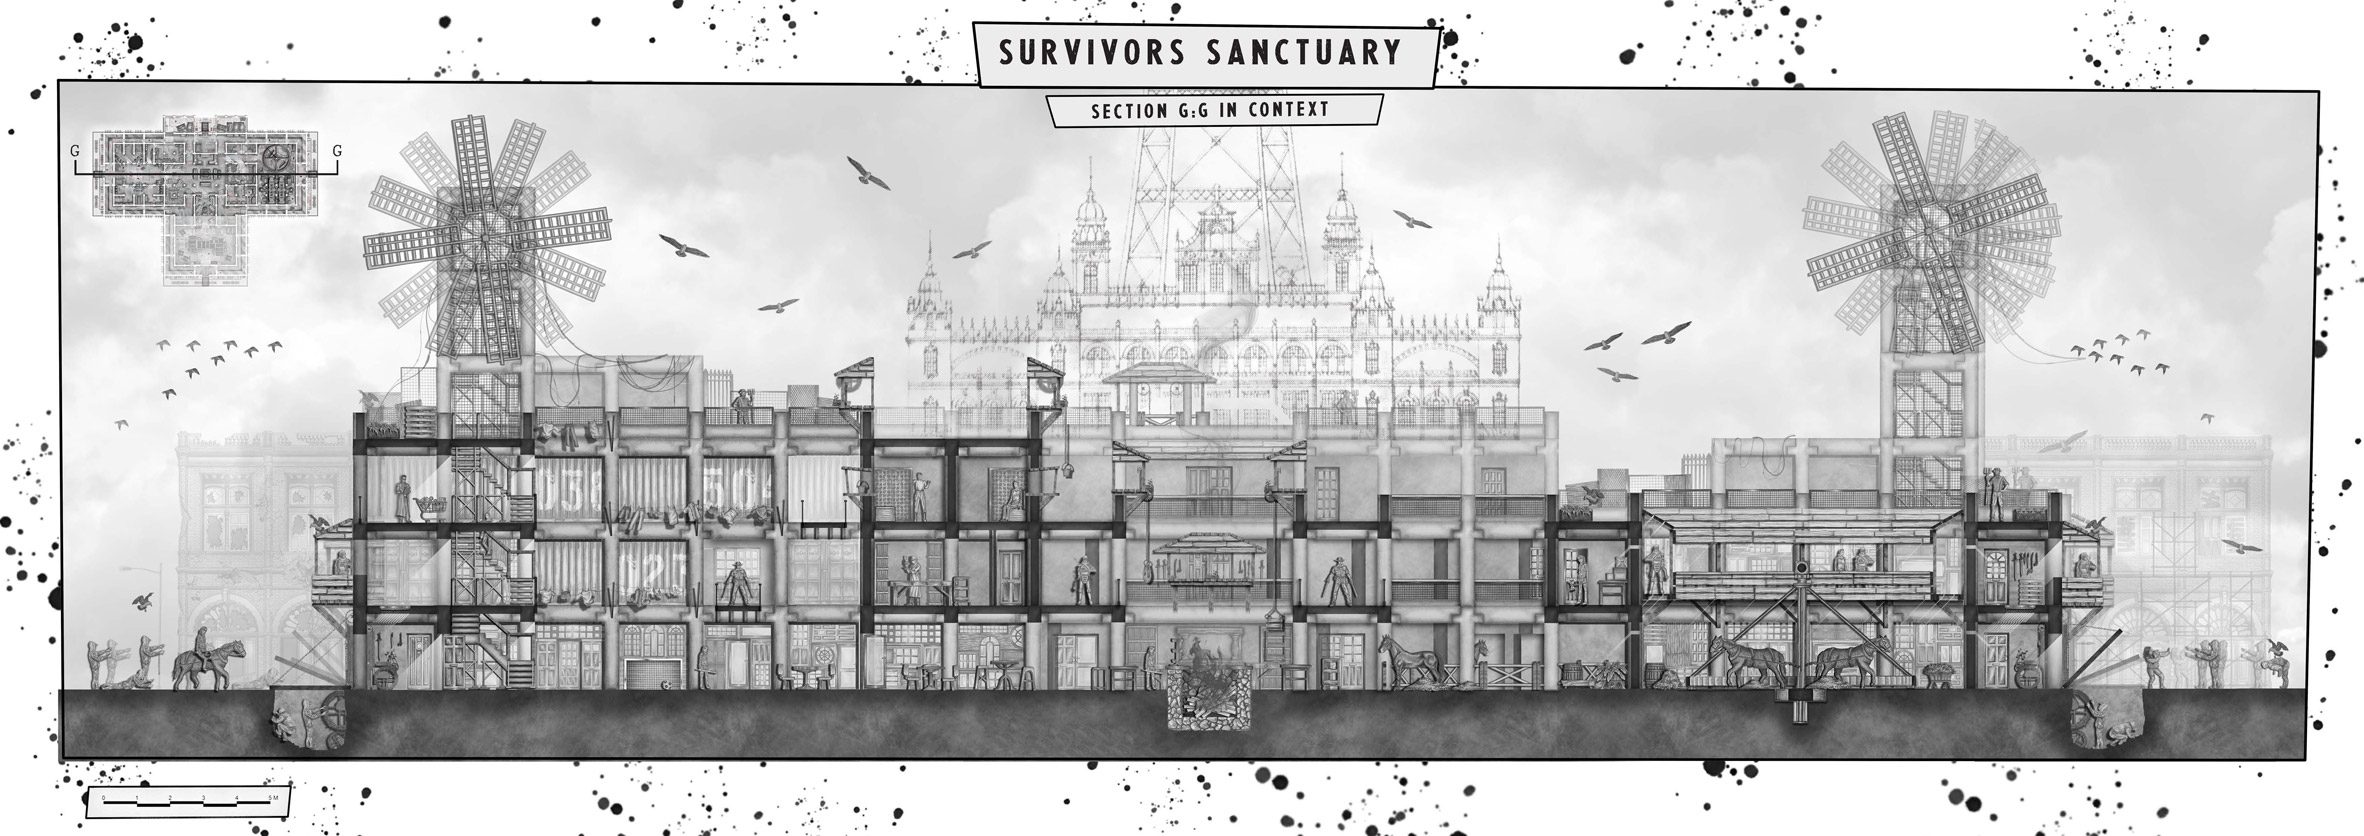 A student illustration of The Survivor's Sanctuary (The Black Plague of Blackpool, The Walking Dead) 